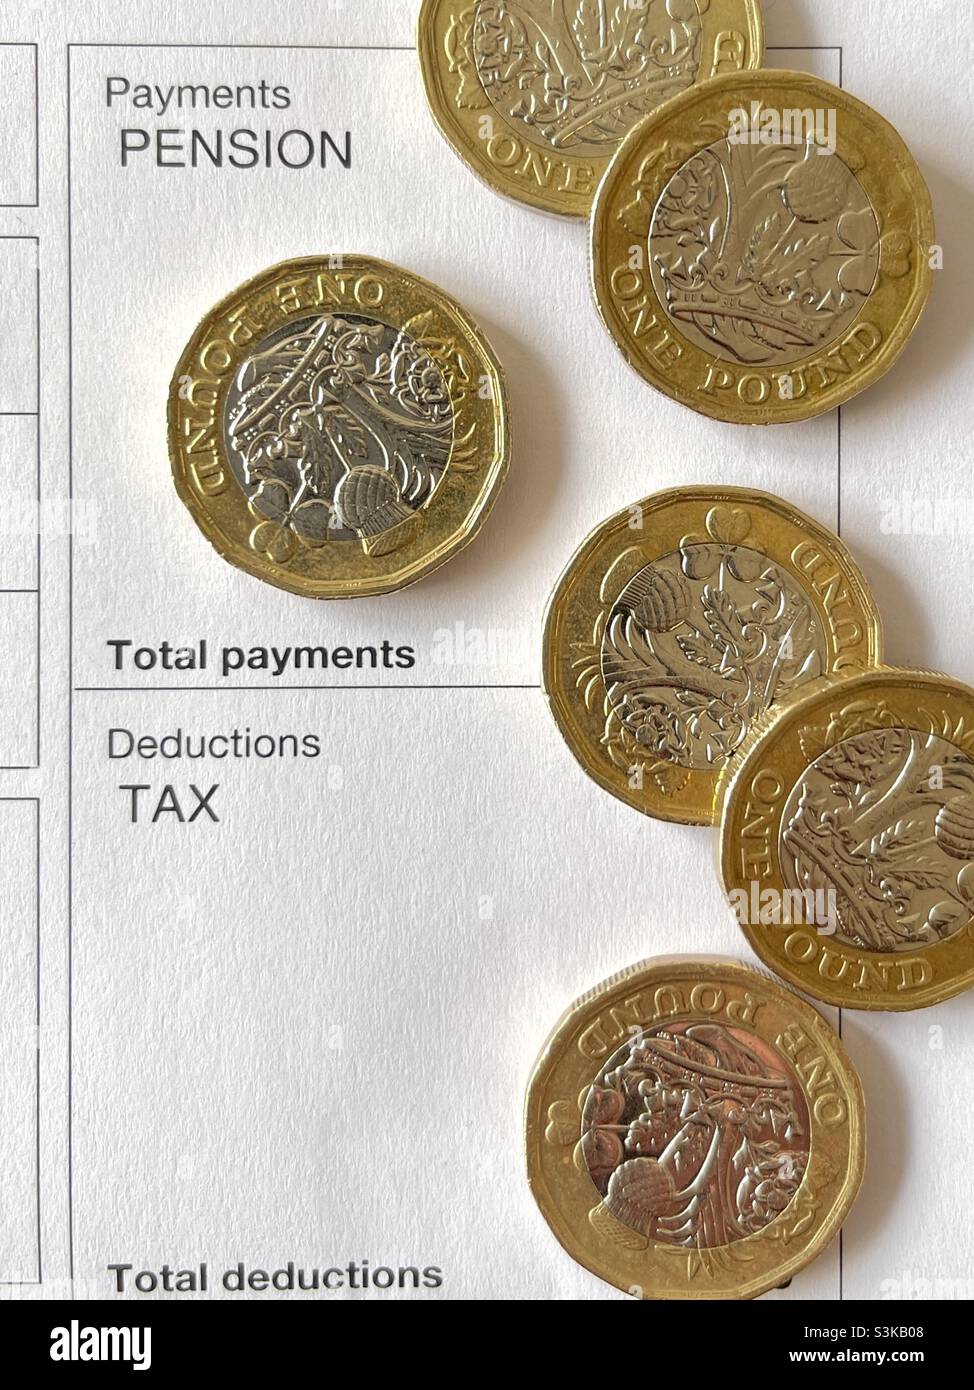 One pound coins on top of an anonymous pension payment slip. Stock Photo